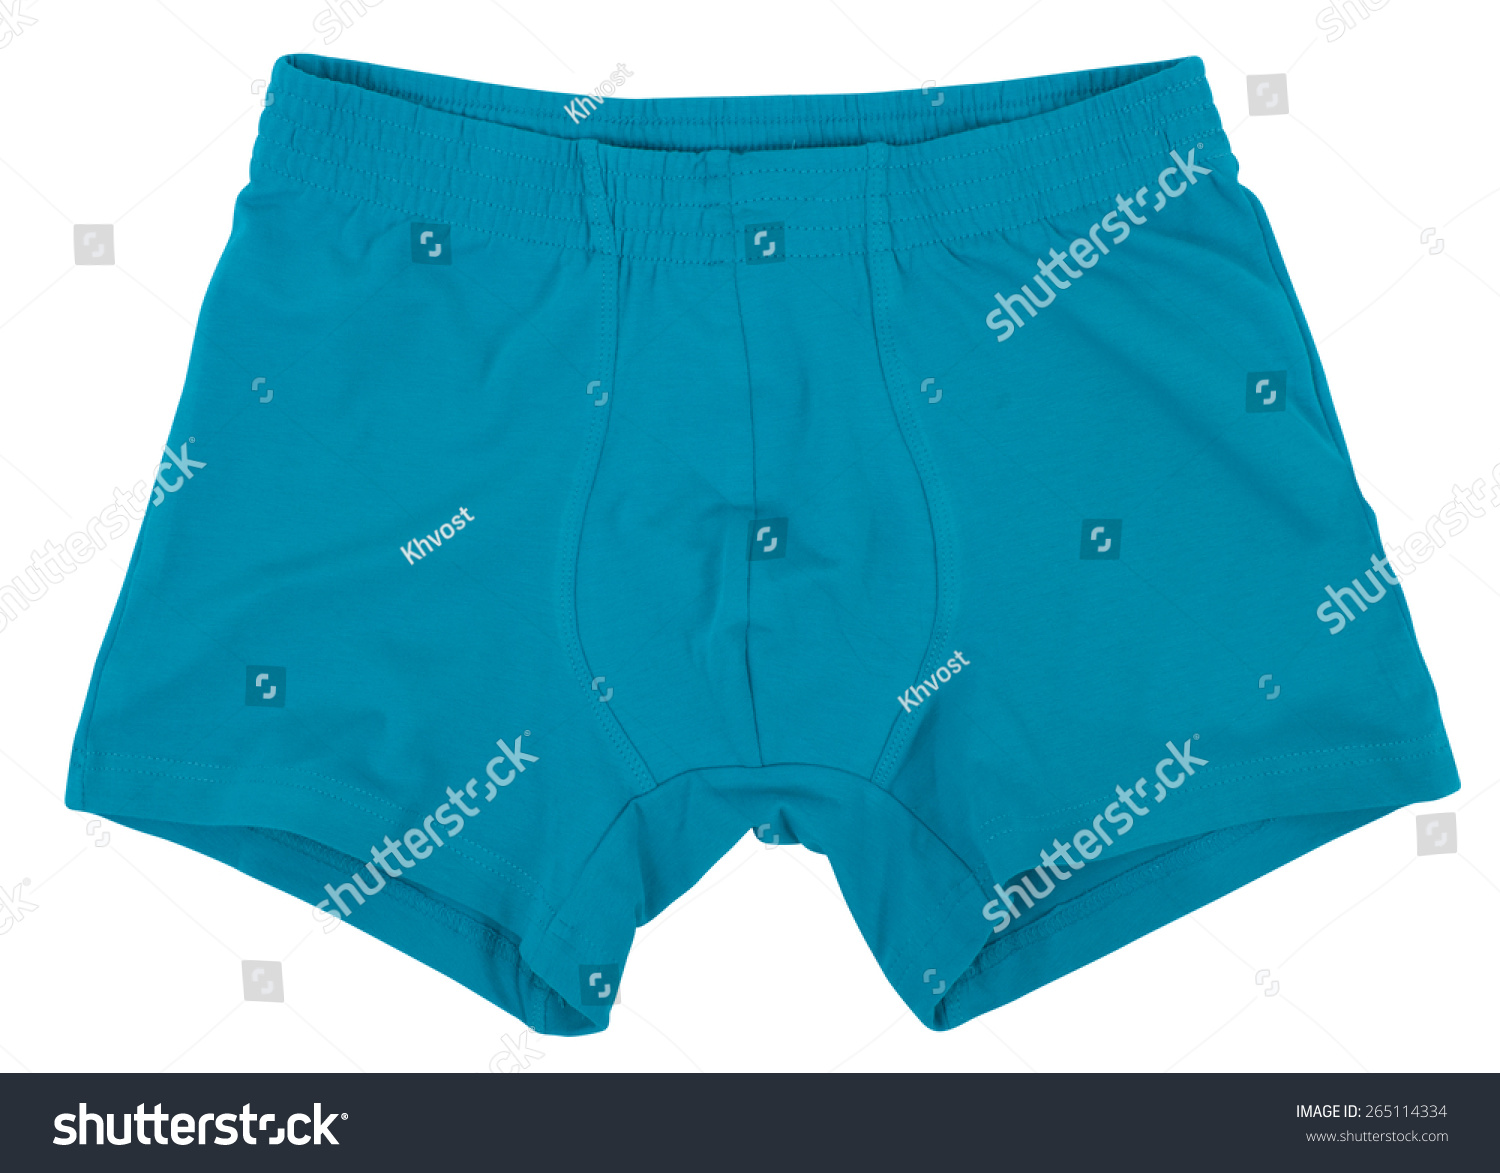 Male Underwear Isolated On White Background Stock Photo (Edit Now ...